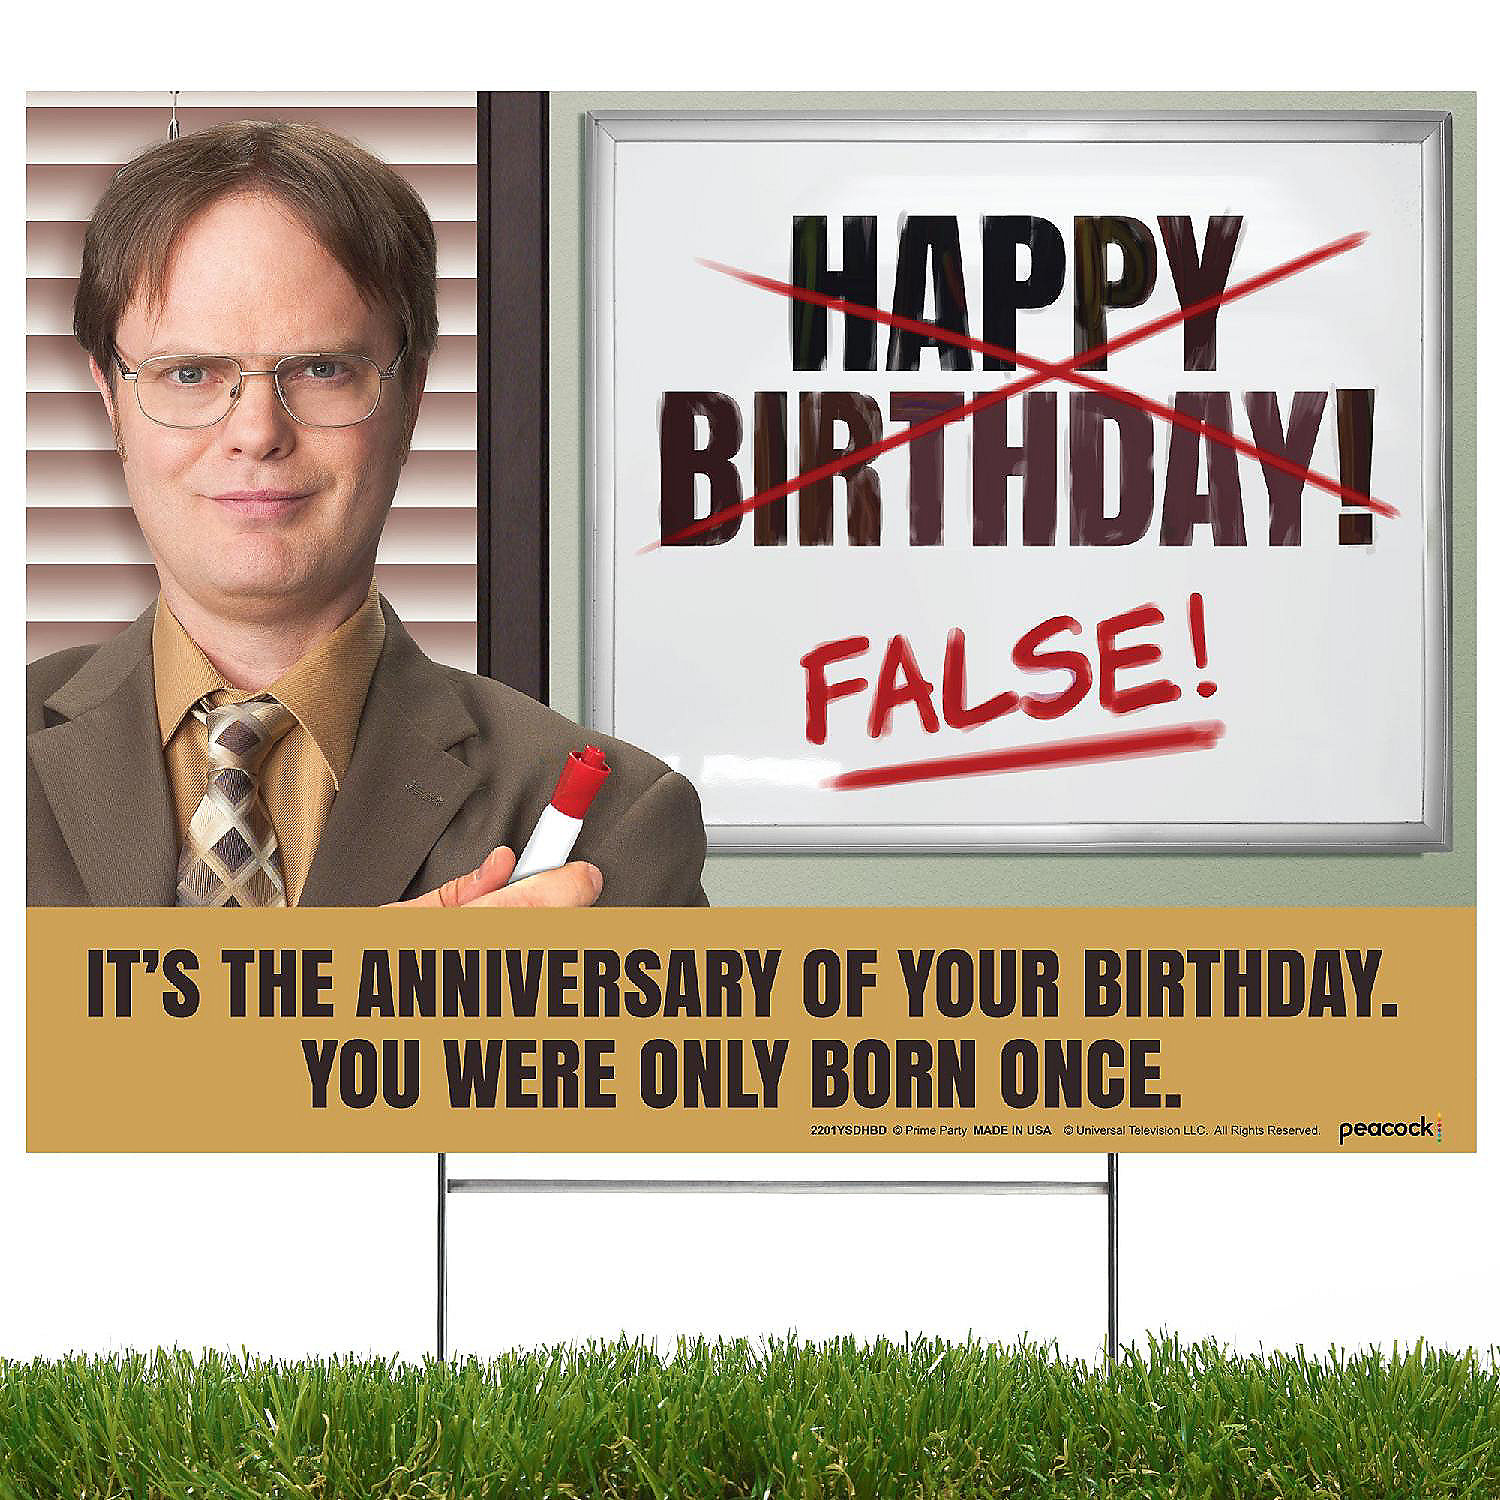 Prime Party Dwight Schrute Happy Birthday False! The Office Yard Sign |  Oriental Trading